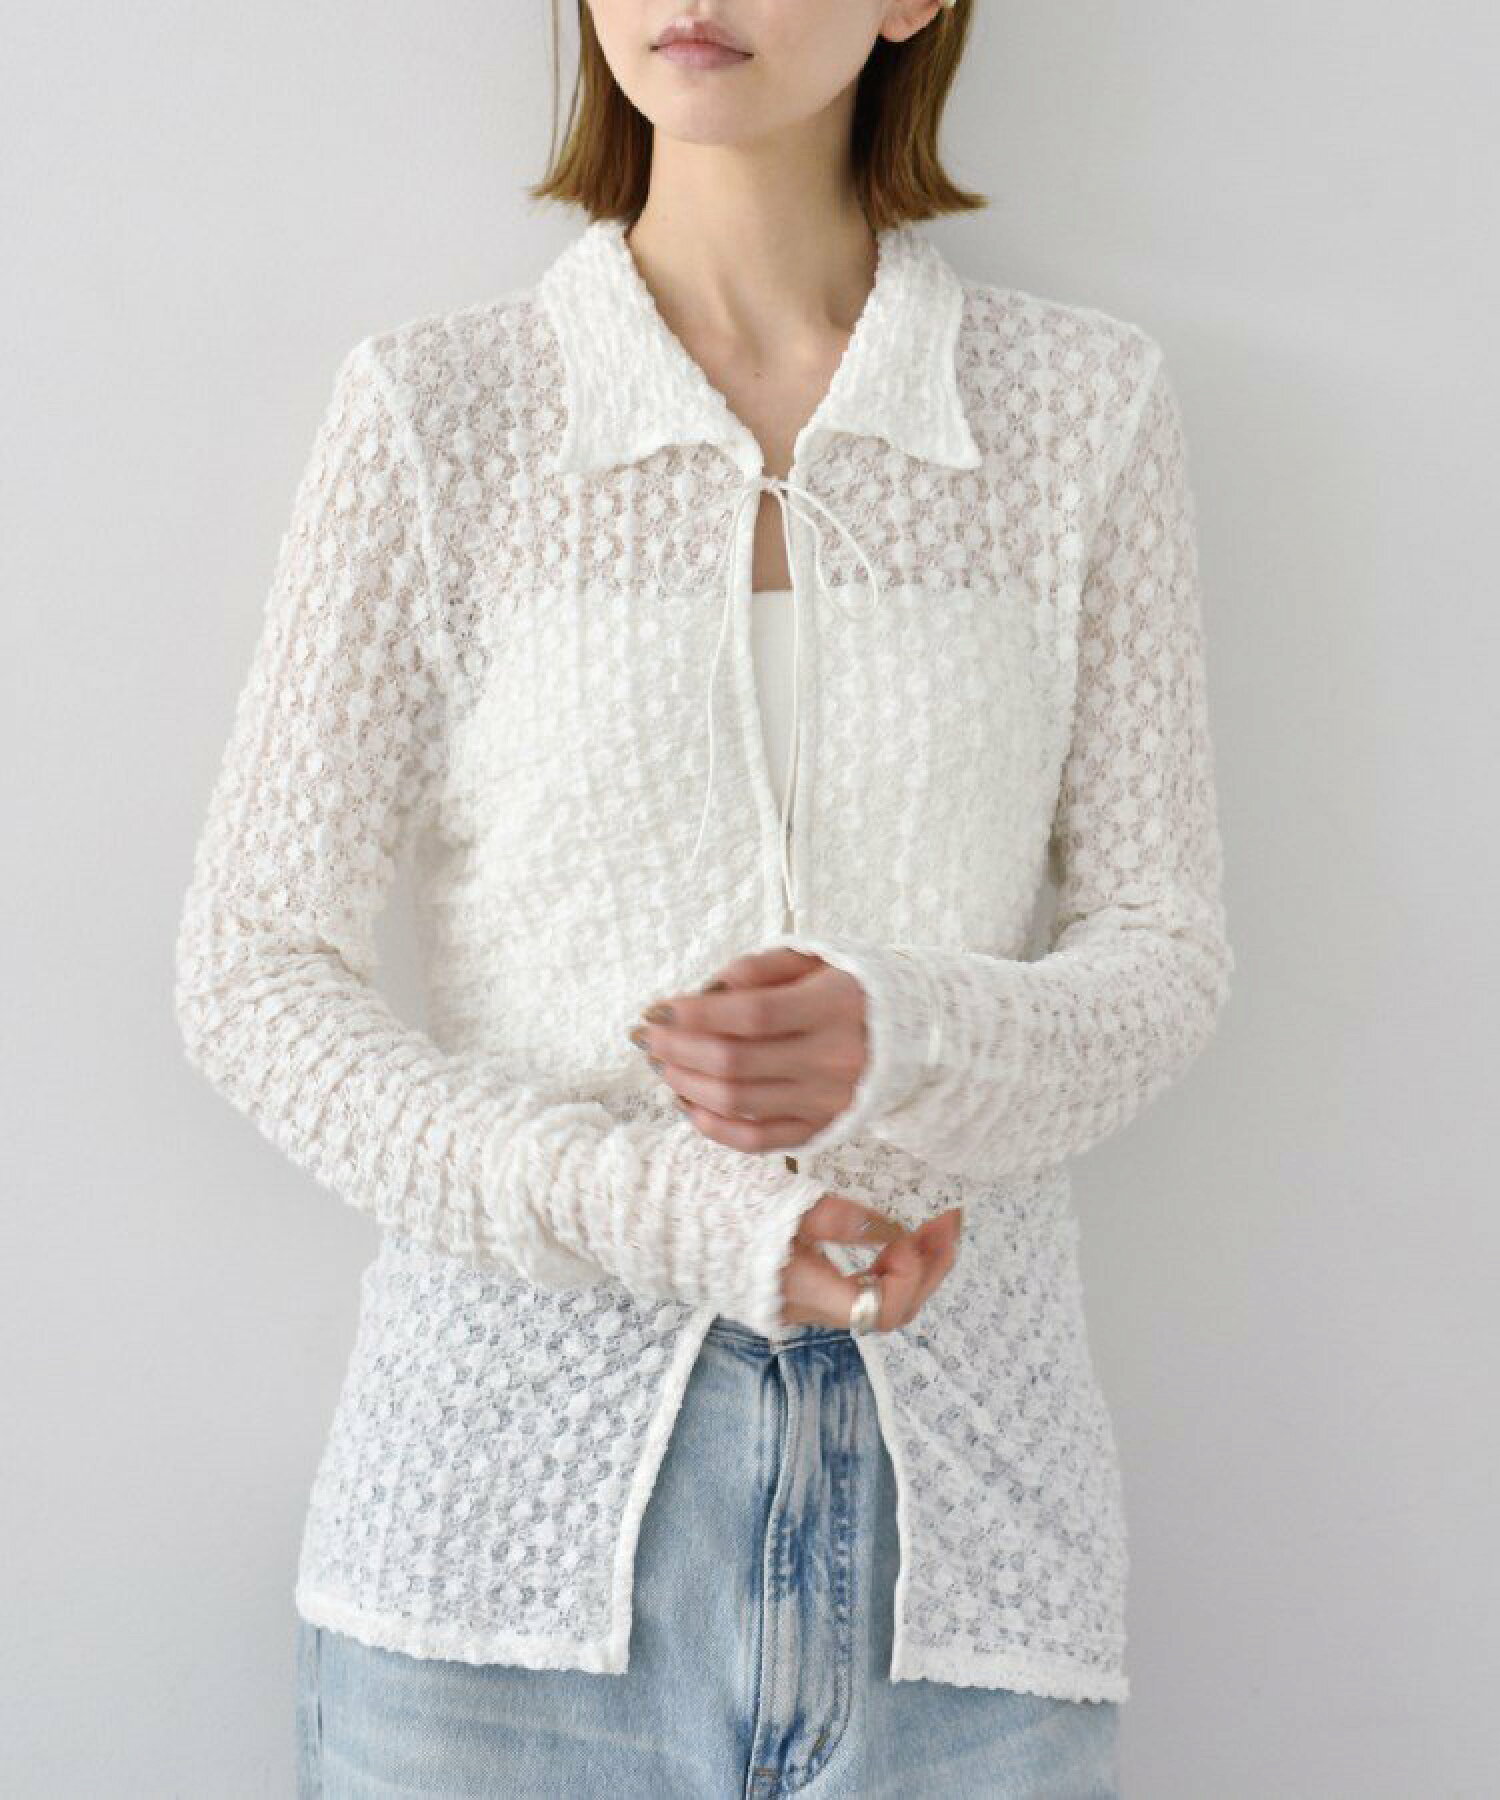 CODE A|shrink lace blouse